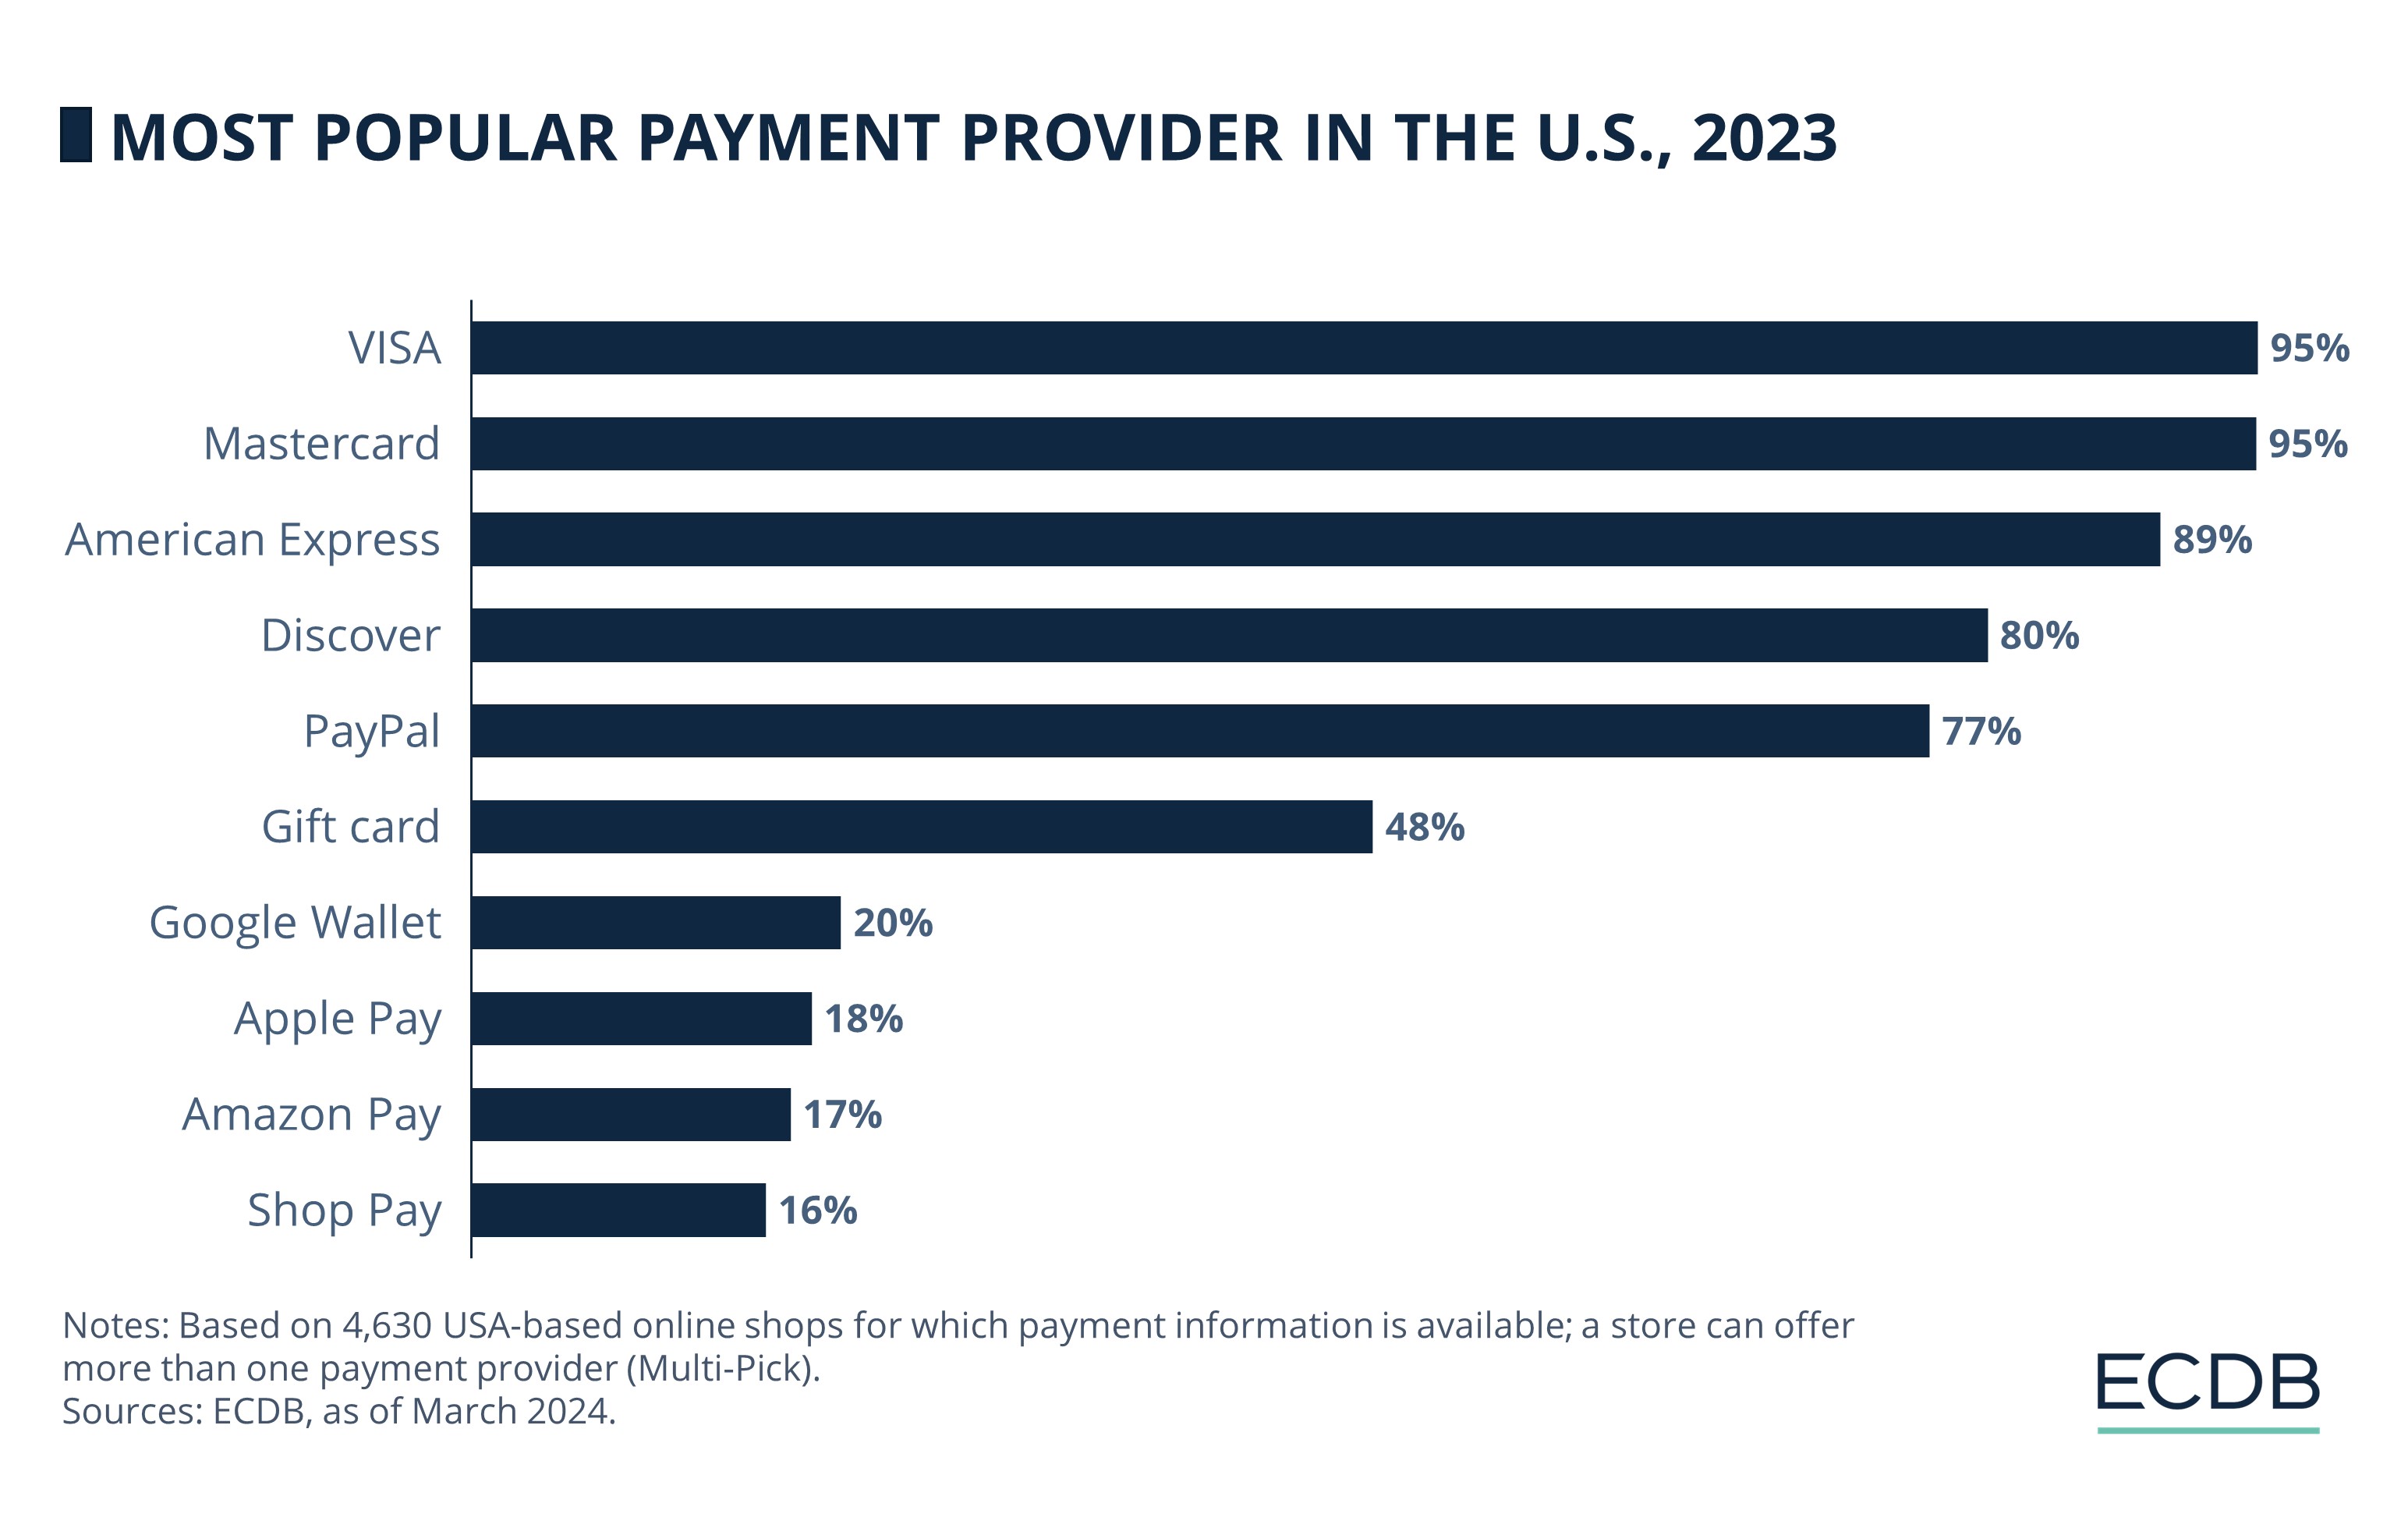 Most Popular Payment Provider in the U.S., 2023 